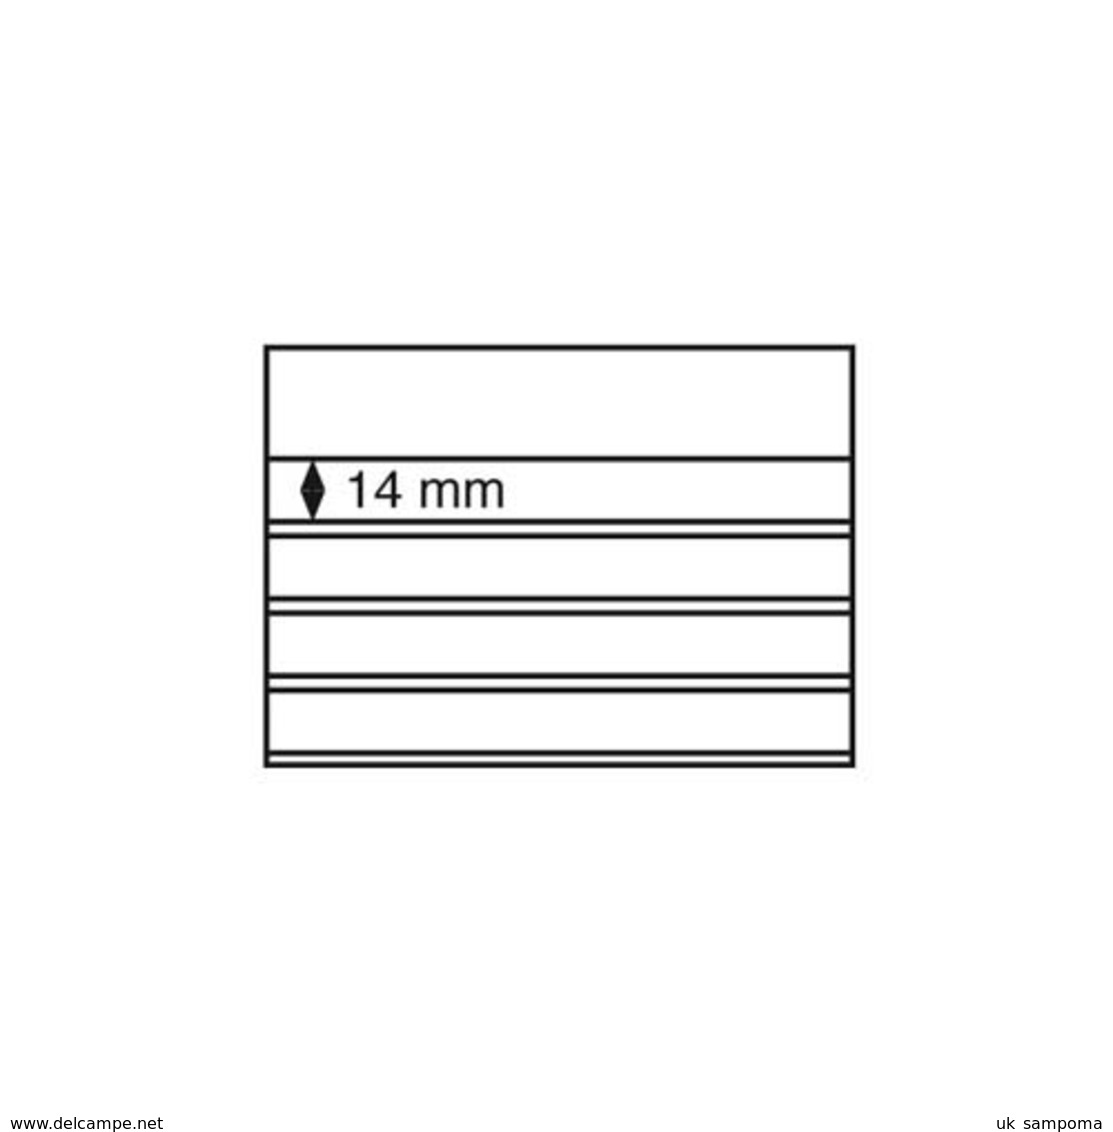 Standard Cards PVC 158x113 Mm,l4 Clear Strips With Cover Sheet, Black Card, 100 Per Pack - Cartes De Stockage